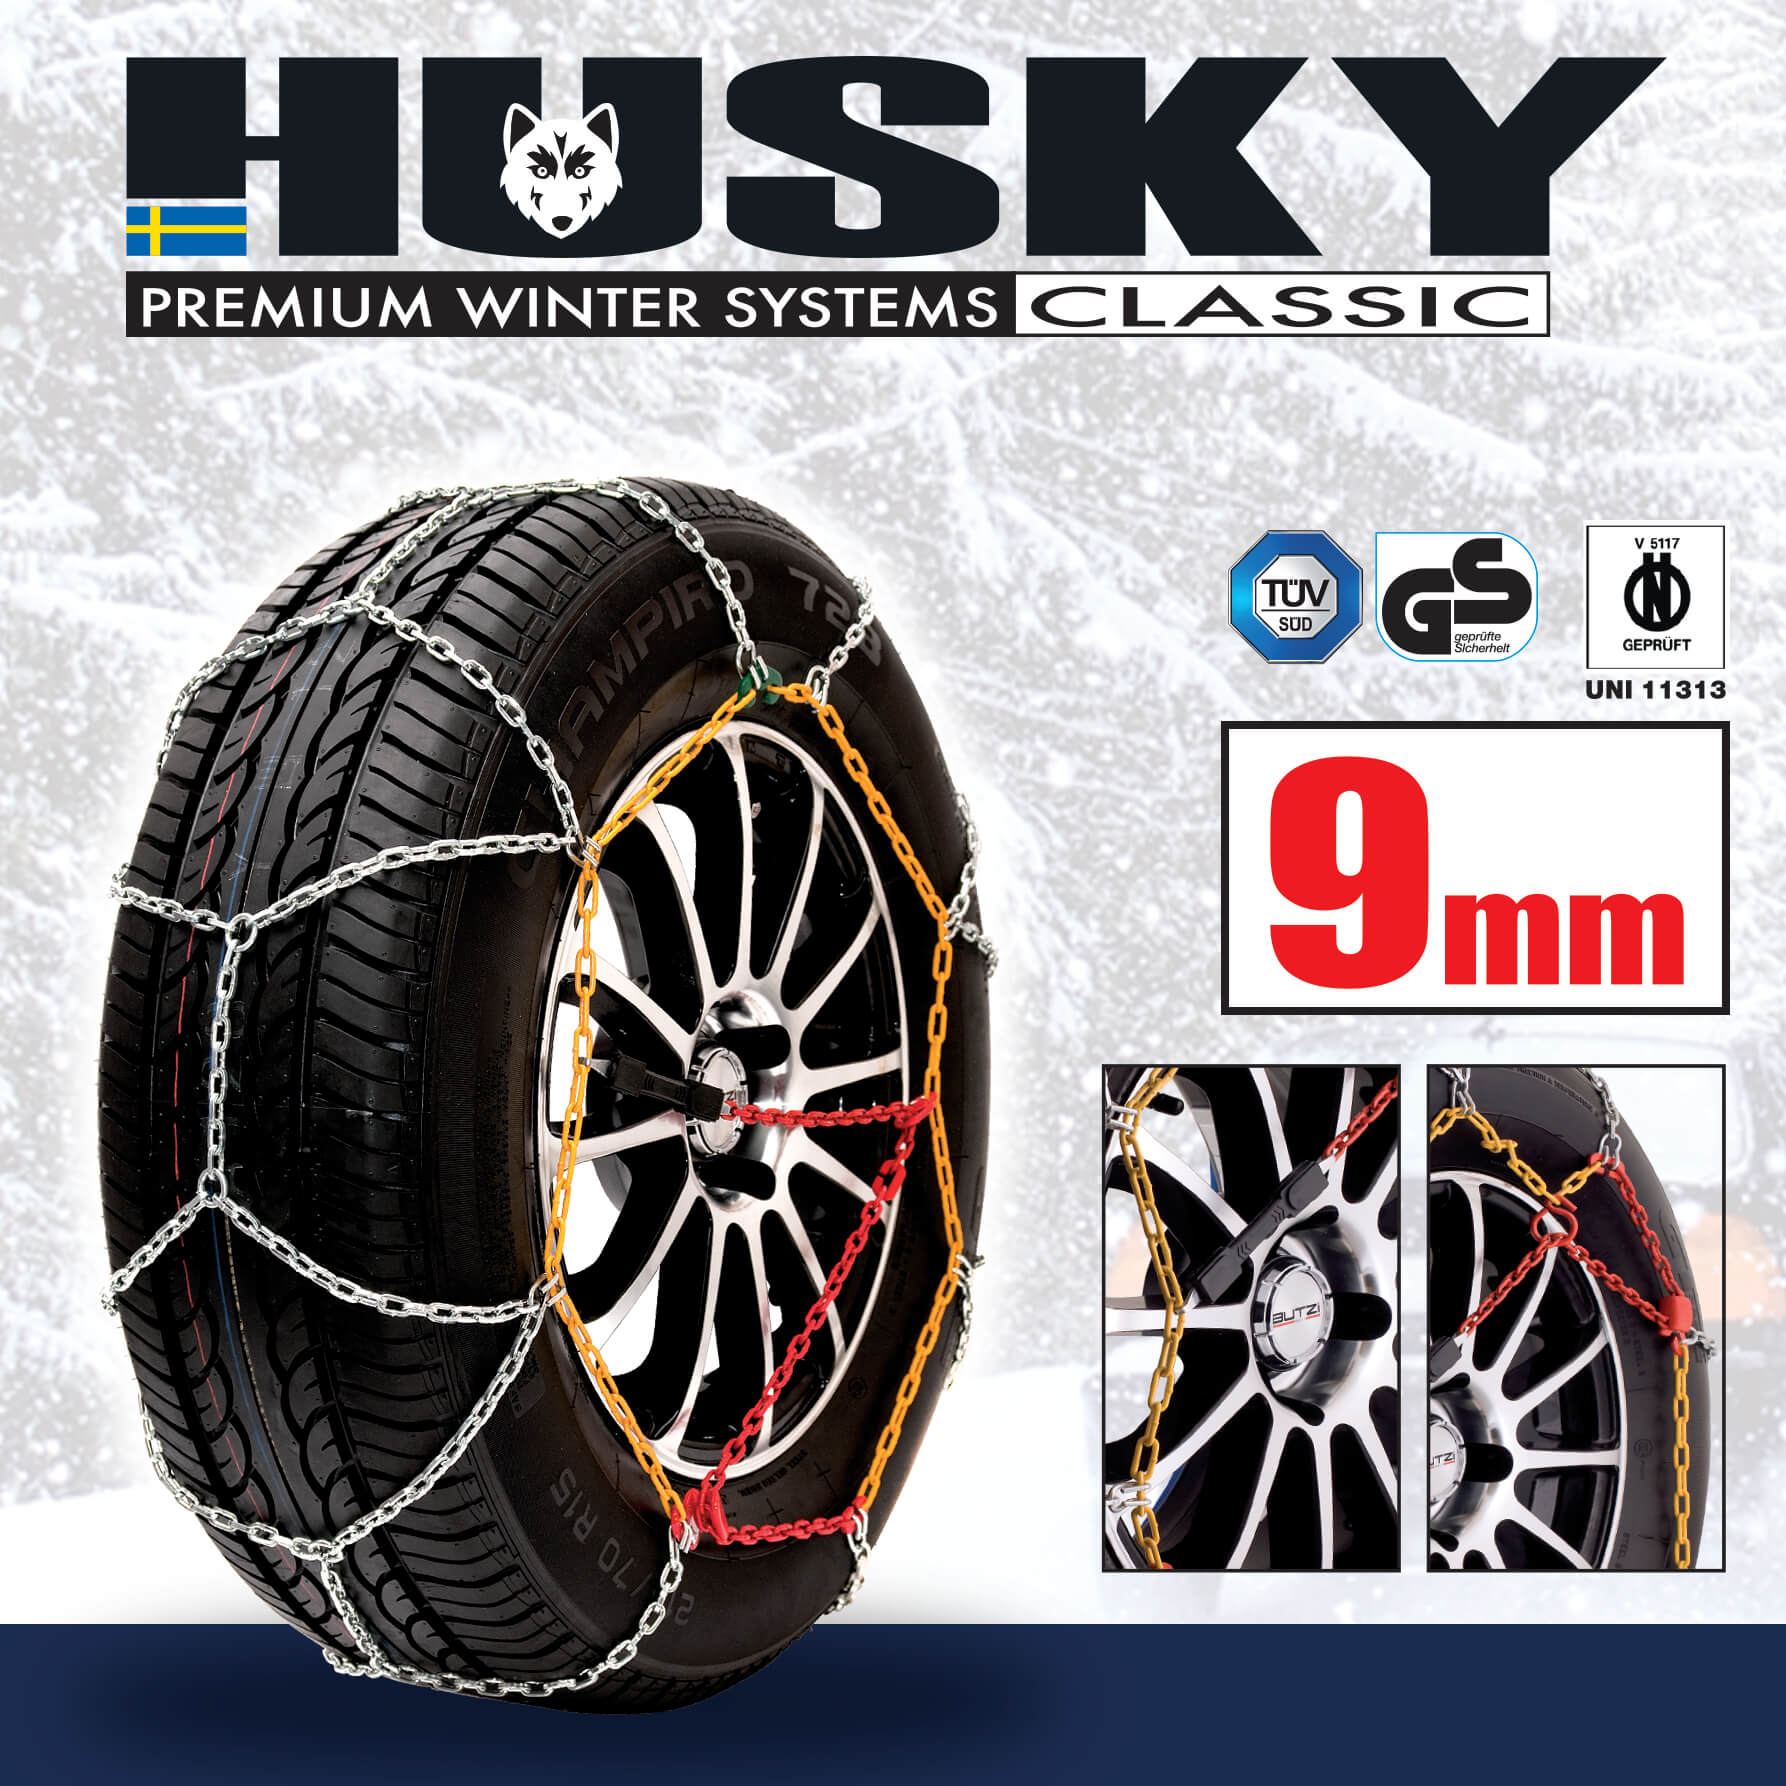 Husky Sumex Textile Winter Car Wheel Ice Frost & Snow Chain Socks for 18 Tyres 245/35 R18 